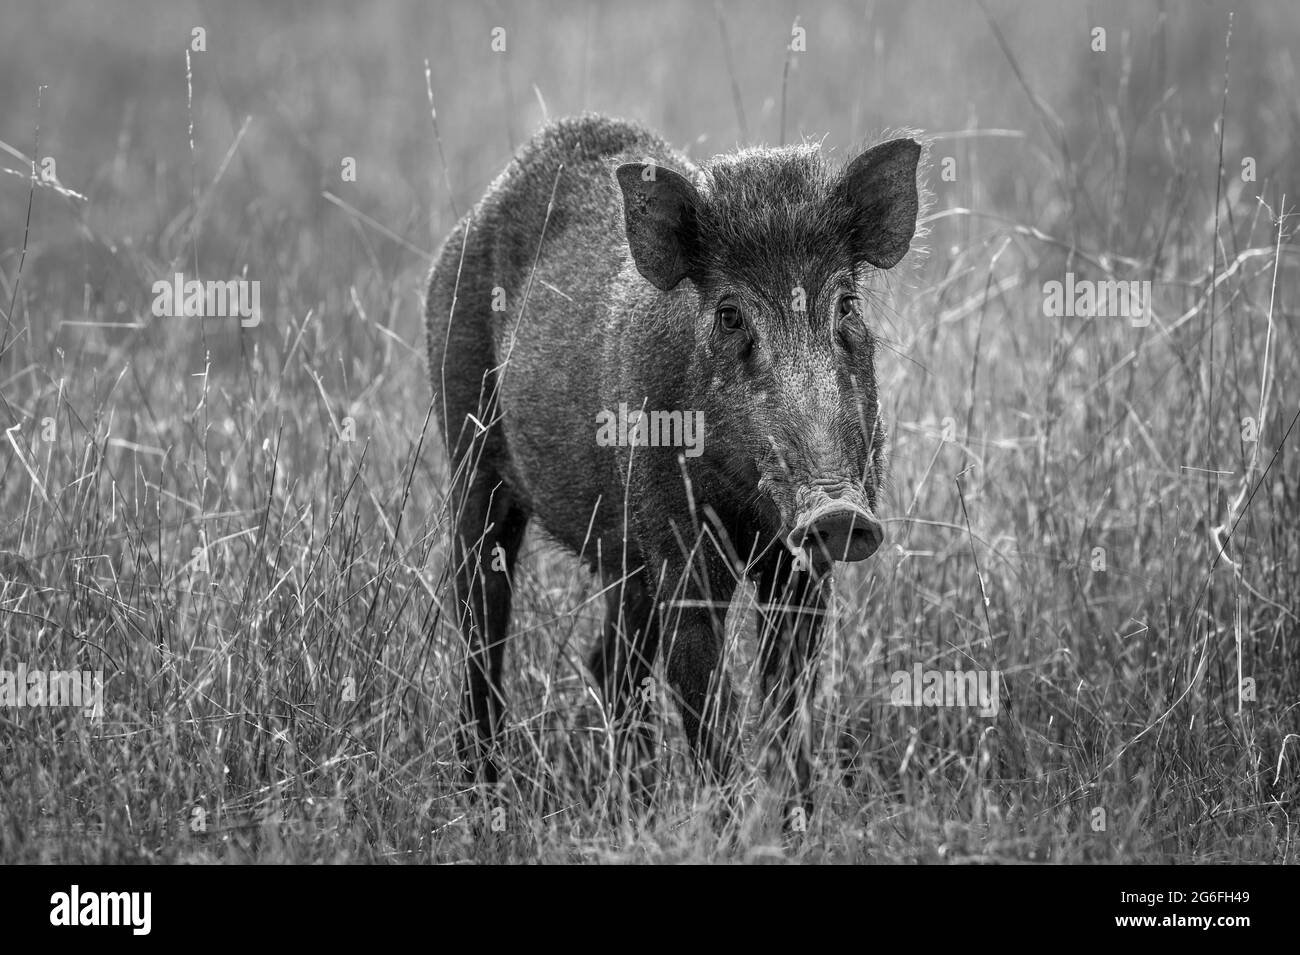 Indian boar or Andamanese or Moupin pig a subspecies of wild boar in black and white at ranthambore national park or tiger reserve rajasthan india - S Stock Photo